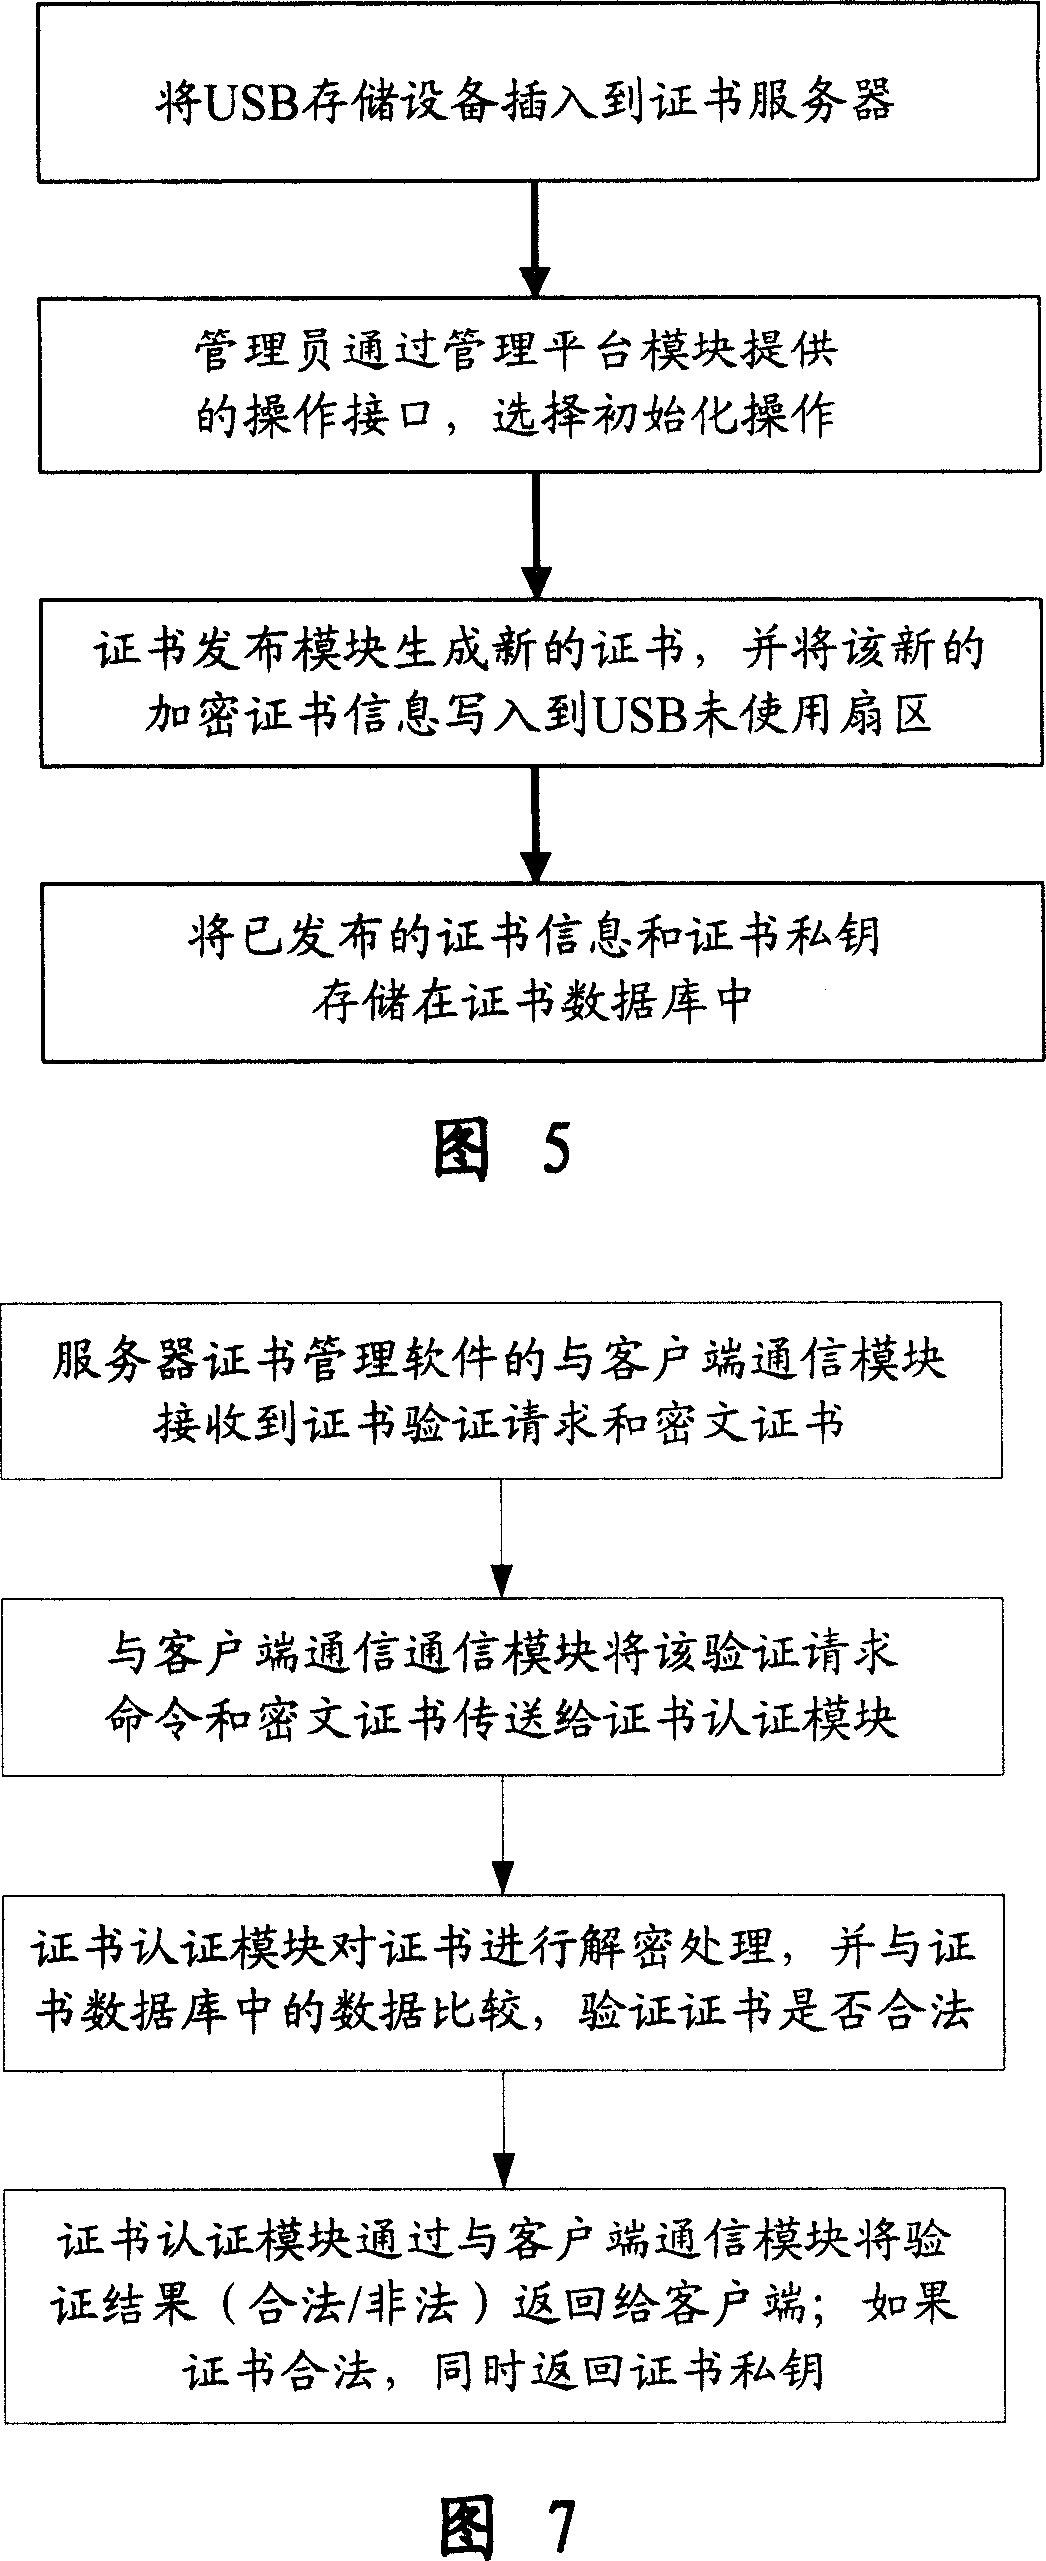 Divulging secrets prevention system of USB storage device date based on certificate and transparent encryption technology